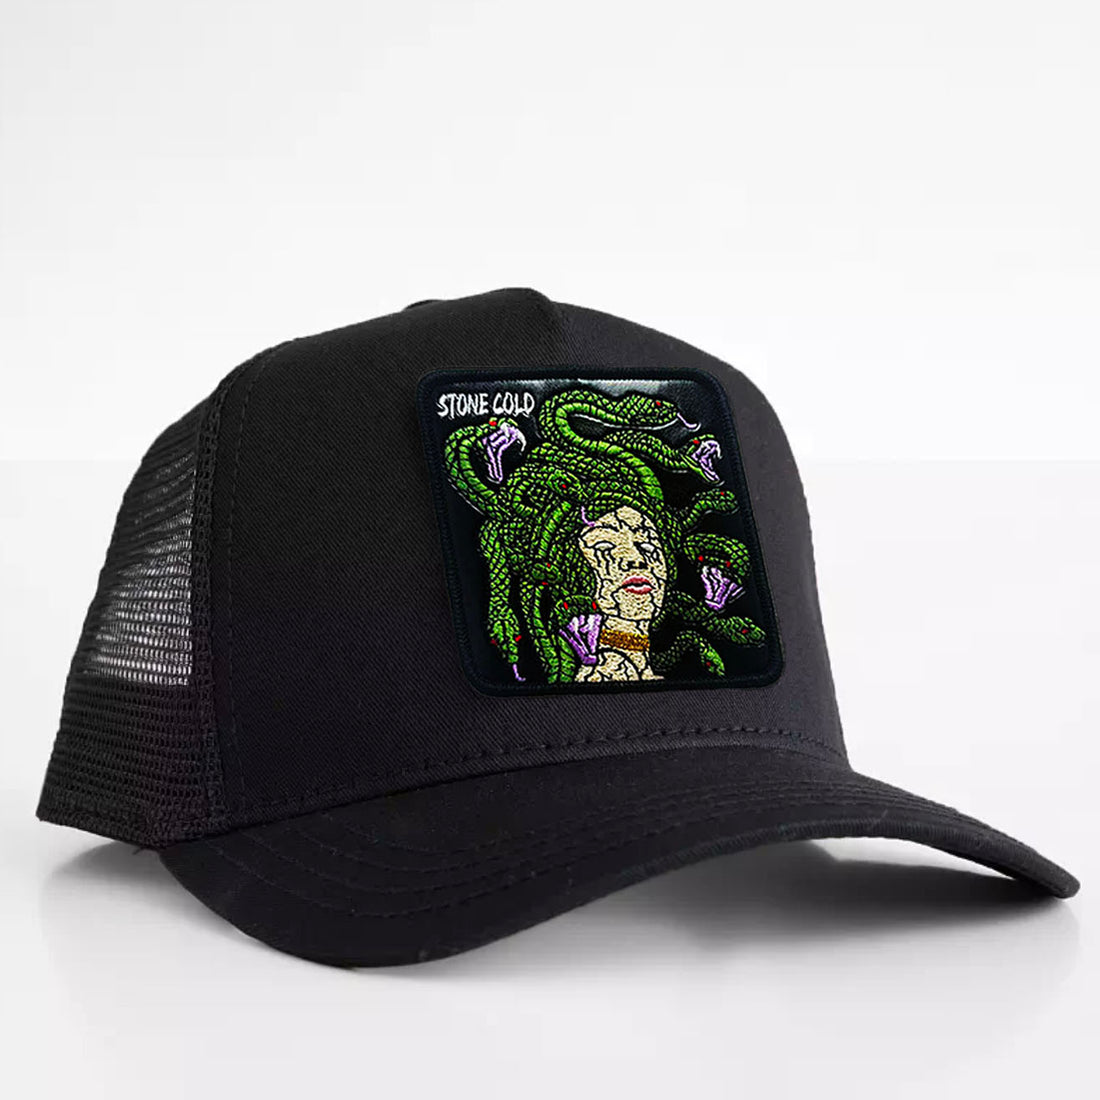 Angler' Trucker Hat - Vintage Green / Navy / Stone – Deep Thoughts